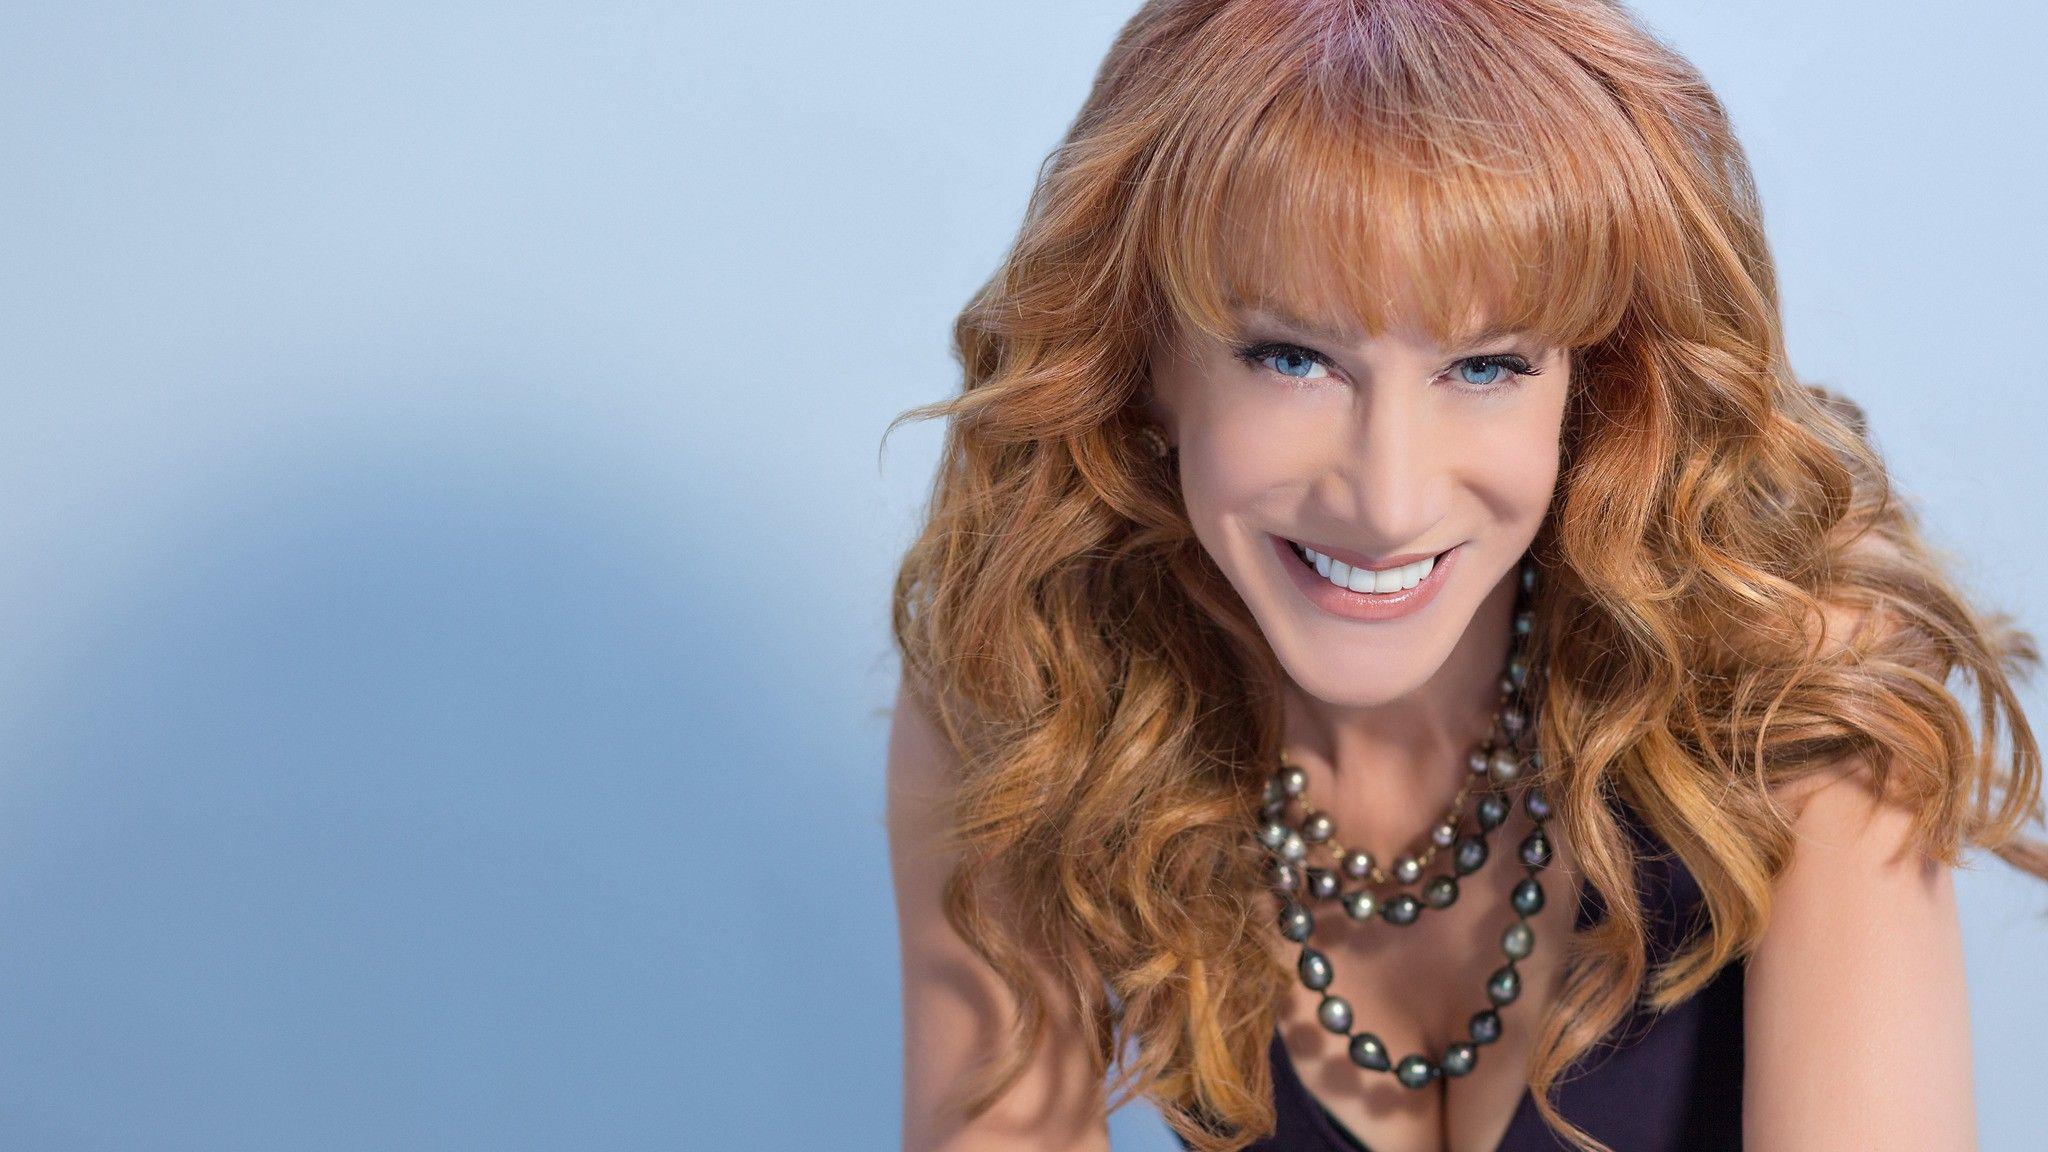 Kathy Griffin. WinStar Casino. Comedy. Dallas News and Events